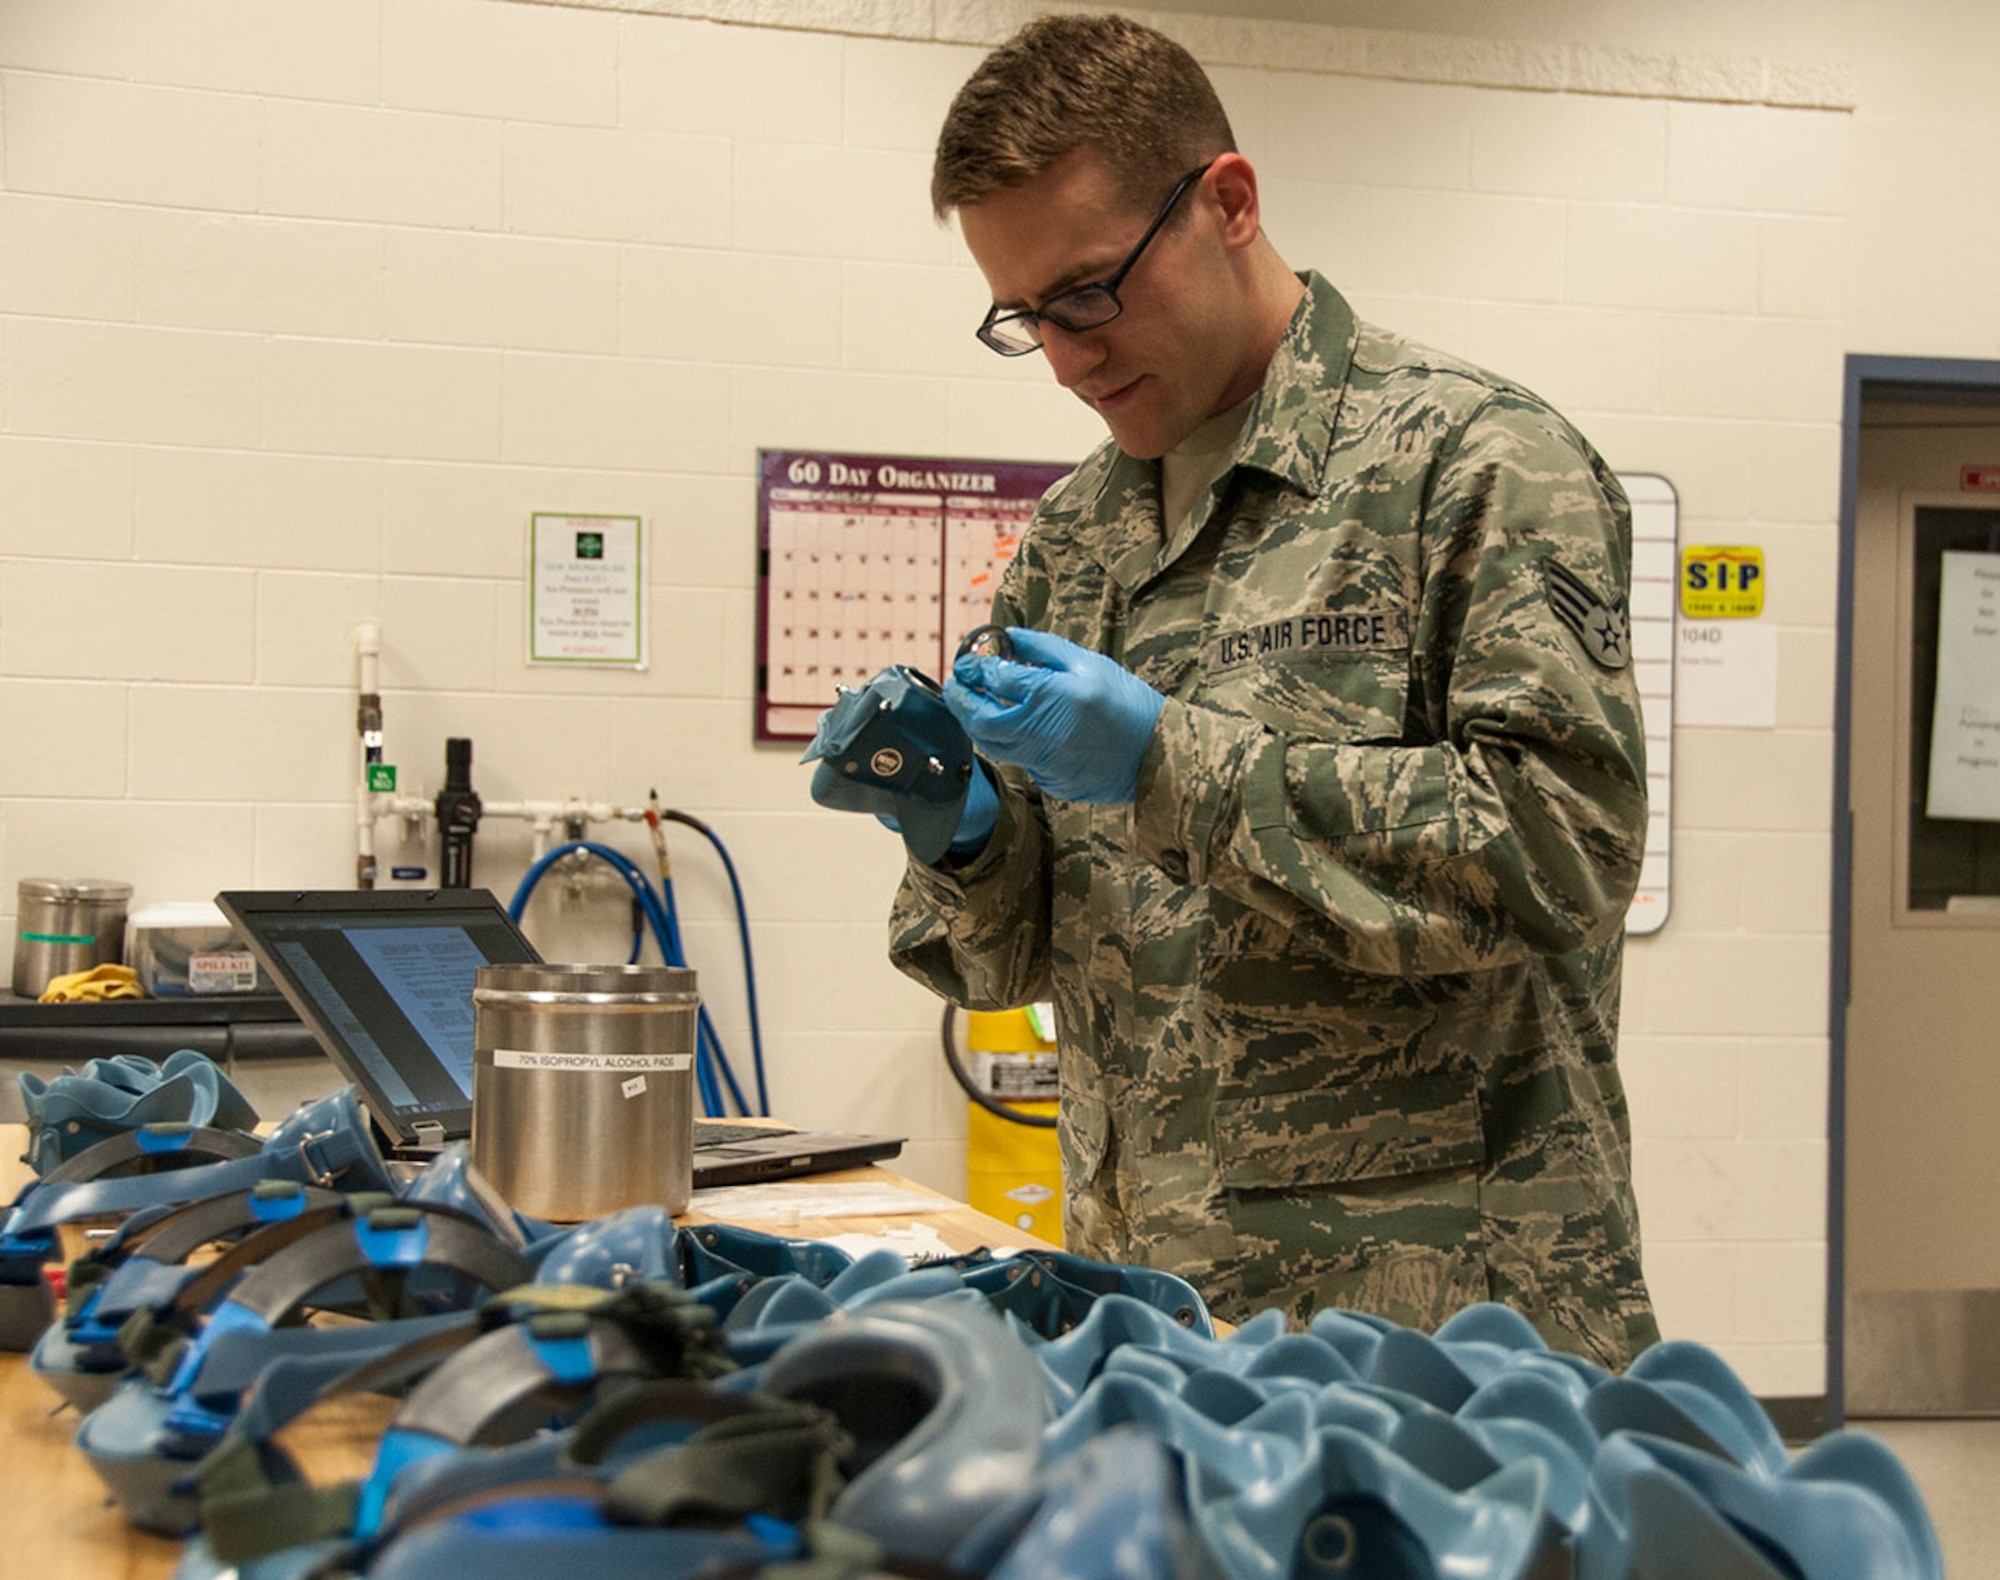 Senior Airman Kenneth Mendenhall, 176th Operation Support Squadron aircrew flight equipment journeyman, inspects a flight mask on Joint Base Elmendorf-Richardson, Alaska, Sept. 15, 2014. Mendenhall is part of an elite group of Airmen who check flight equipment for any inconsistencies or defects that may inhibit its use during real world missions. (U.S. Air Force photo/Airman 1st Class Kyle Johnson)